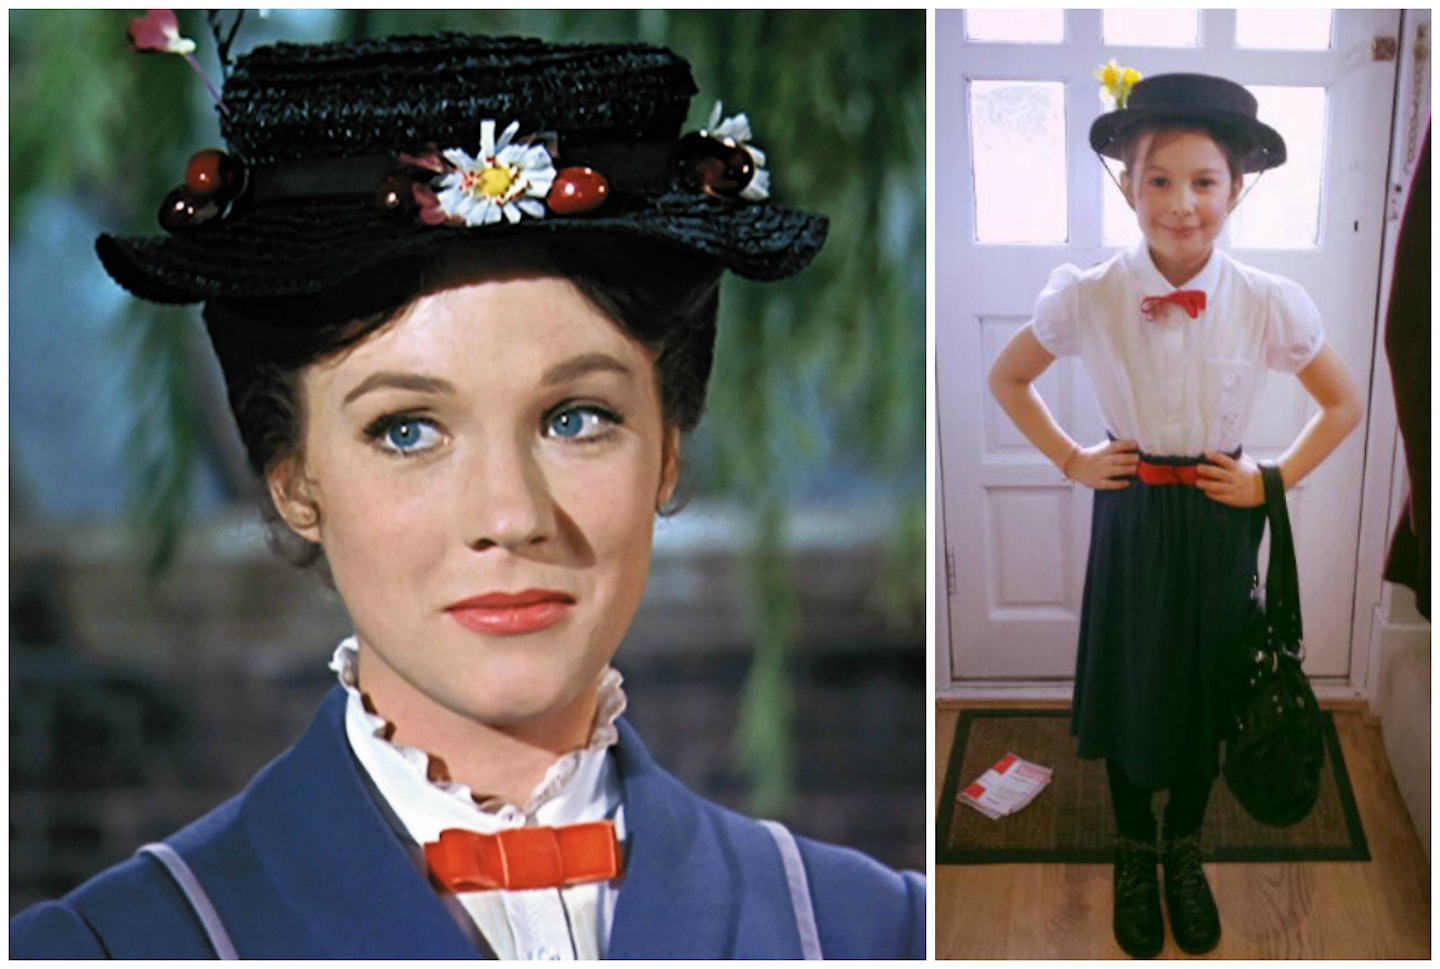 mary-poppins-world-book-day-ideas-costumes-inspiration-outfits